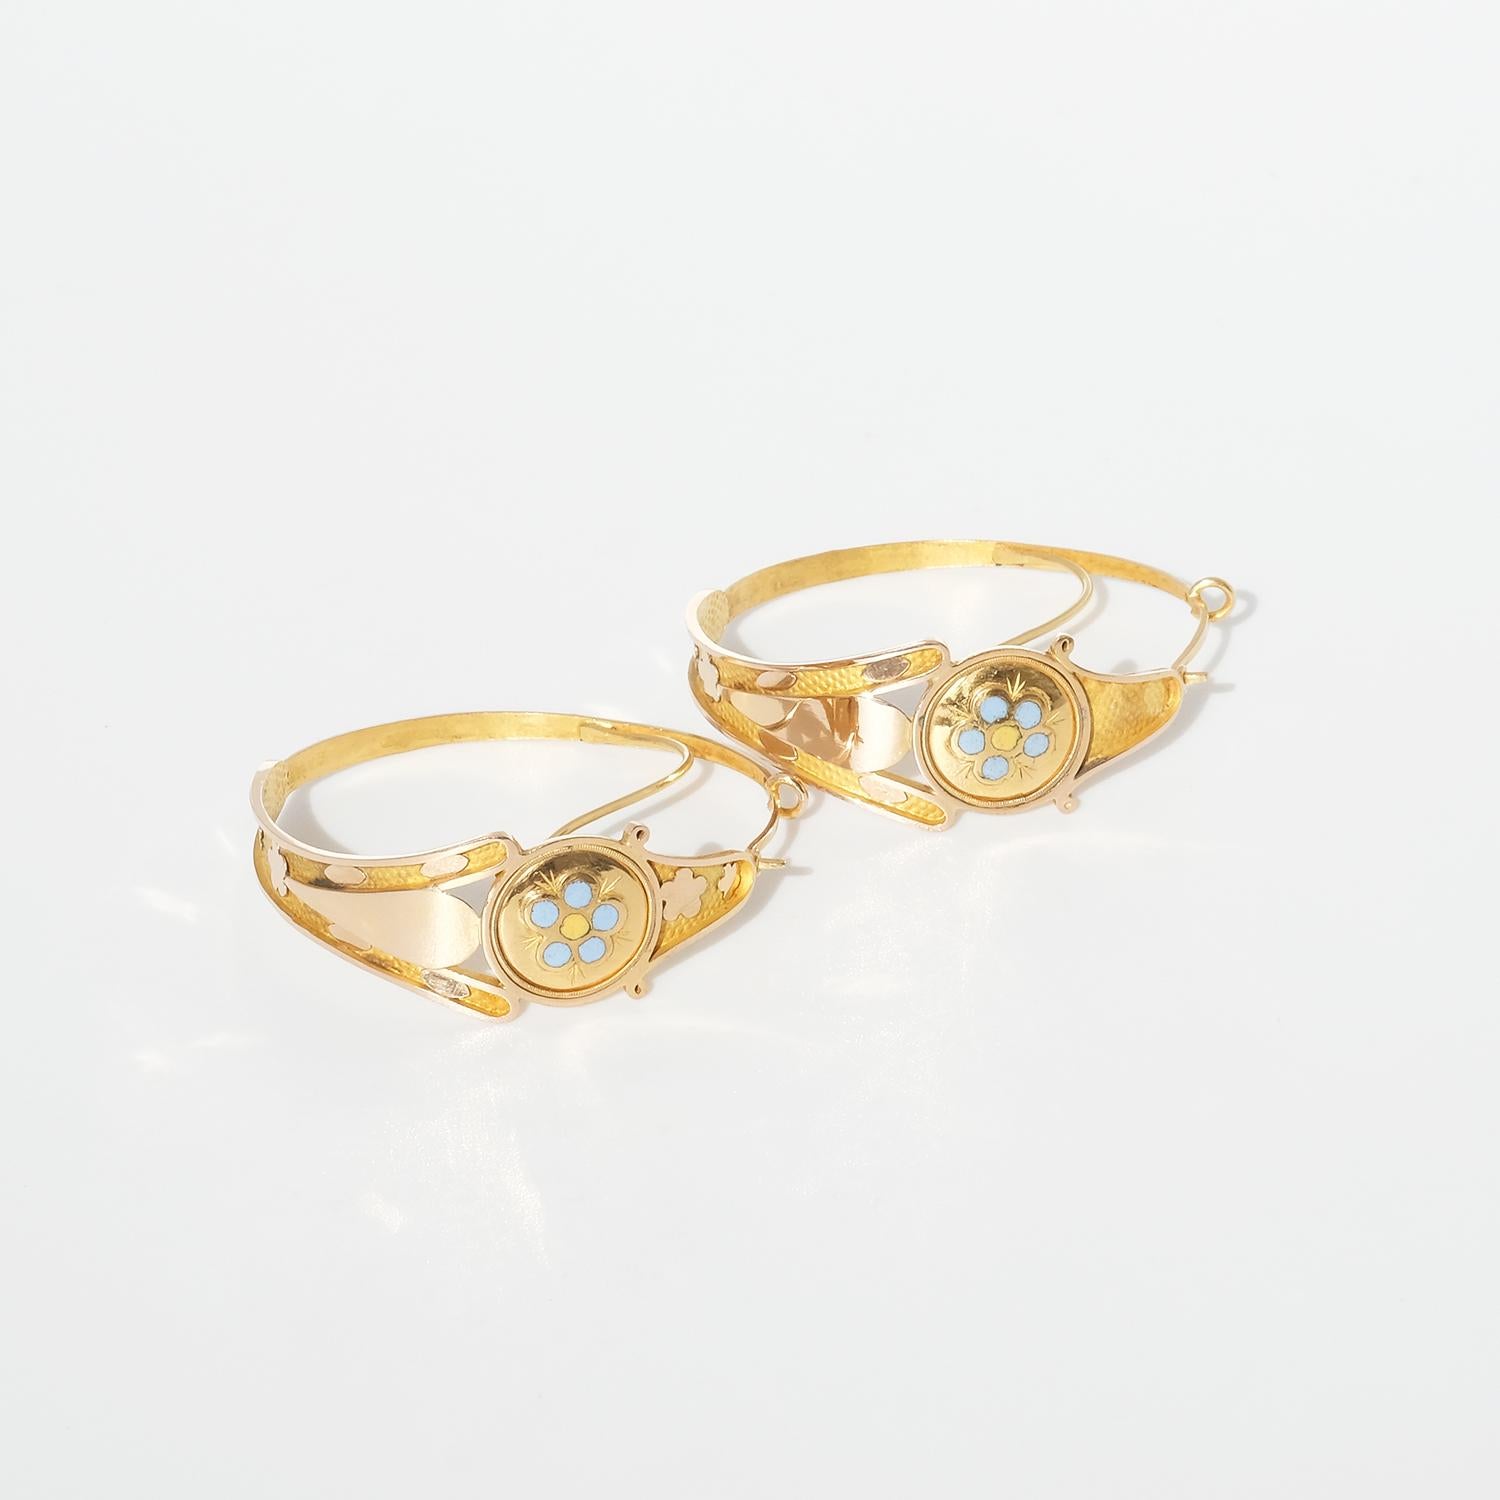 Pair of 18 K Gold Earrings Made Year 1820 6